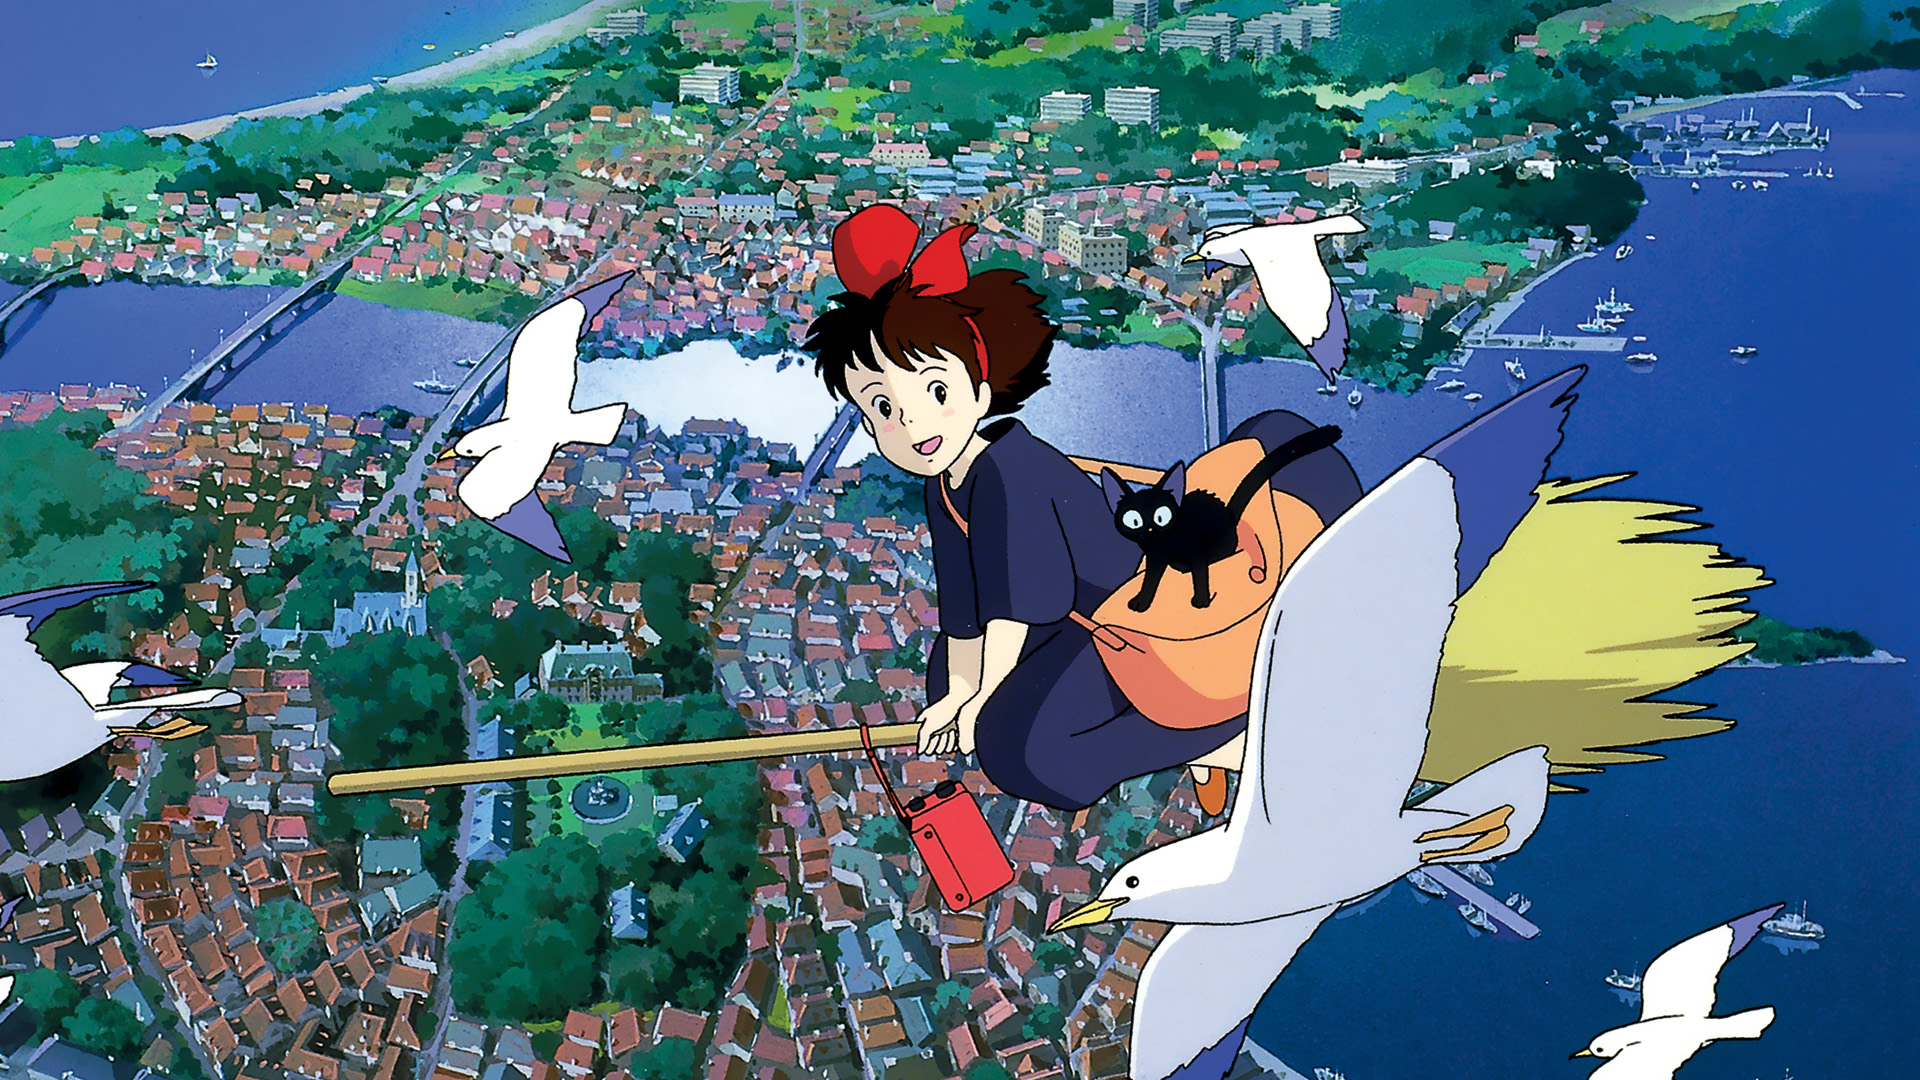 Anime Kiki's Delivery Service HD Wallpaper | Background Image